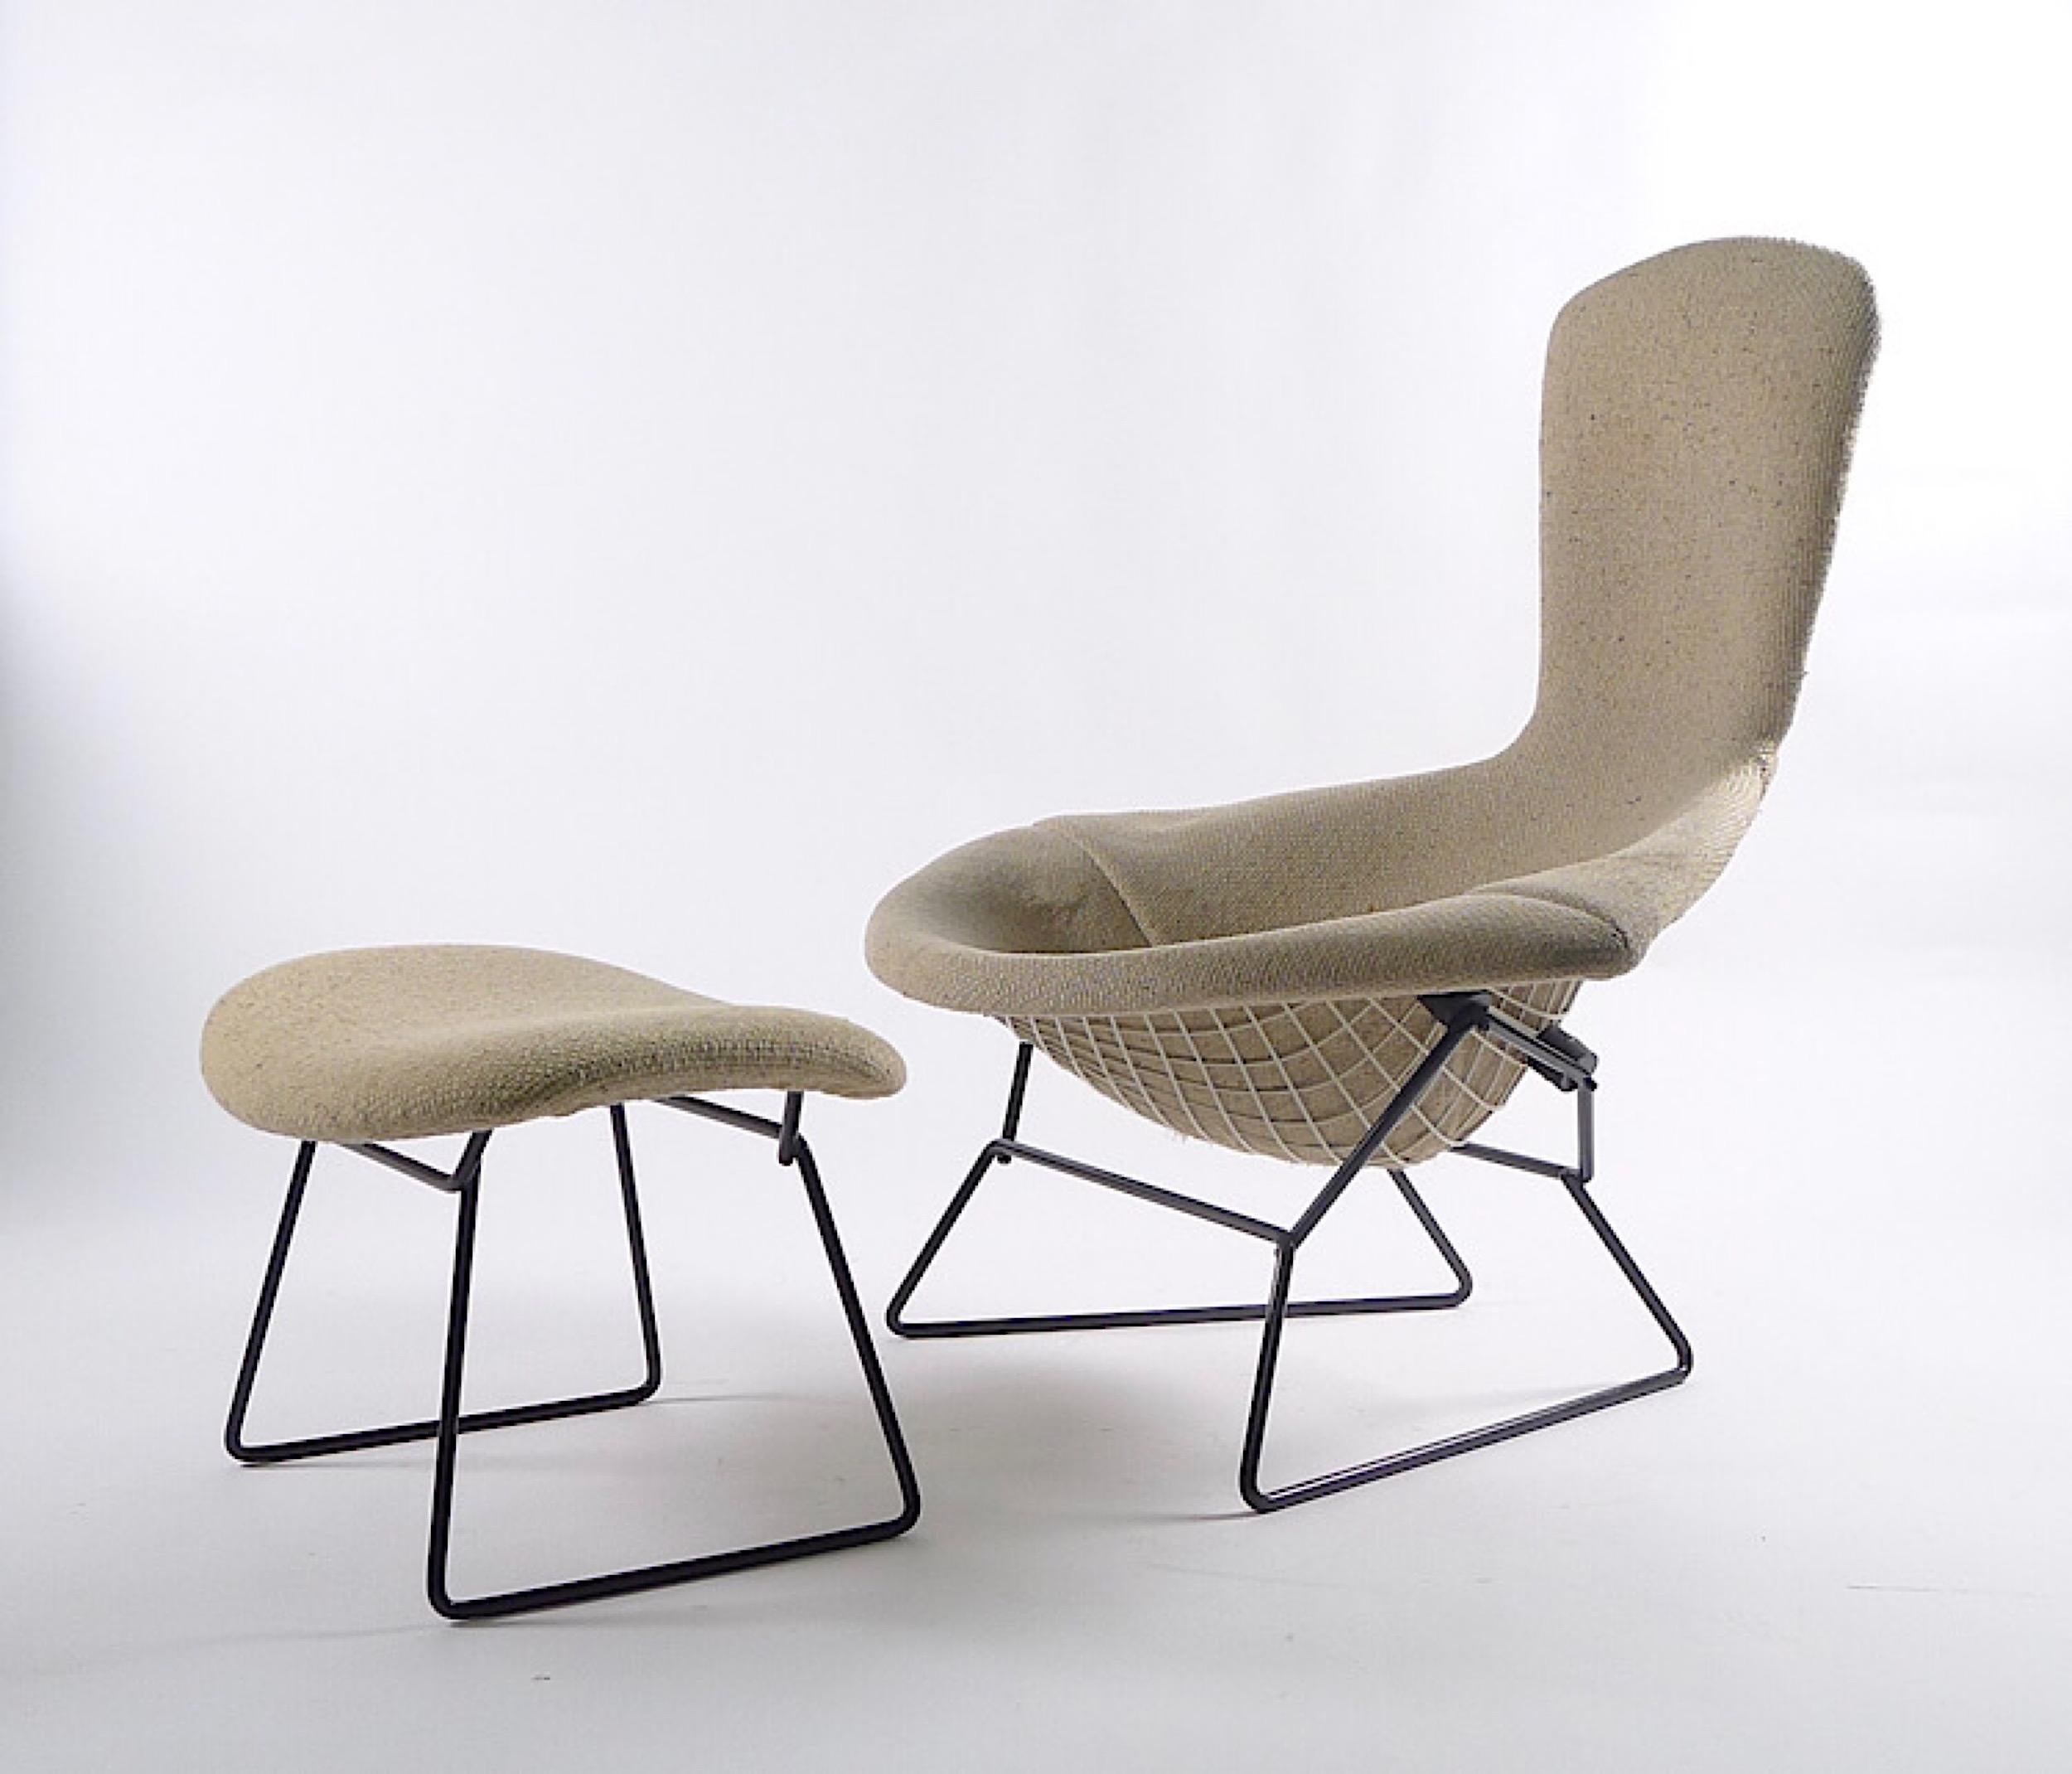 Harry Bertoia bird chair and ottoman, designed in 1952 as part of his collection for Knoll International, lacquered steel frame with original oatmeal tweed fabric

The white and black lacquered finish to the steel frame of the chair and stool